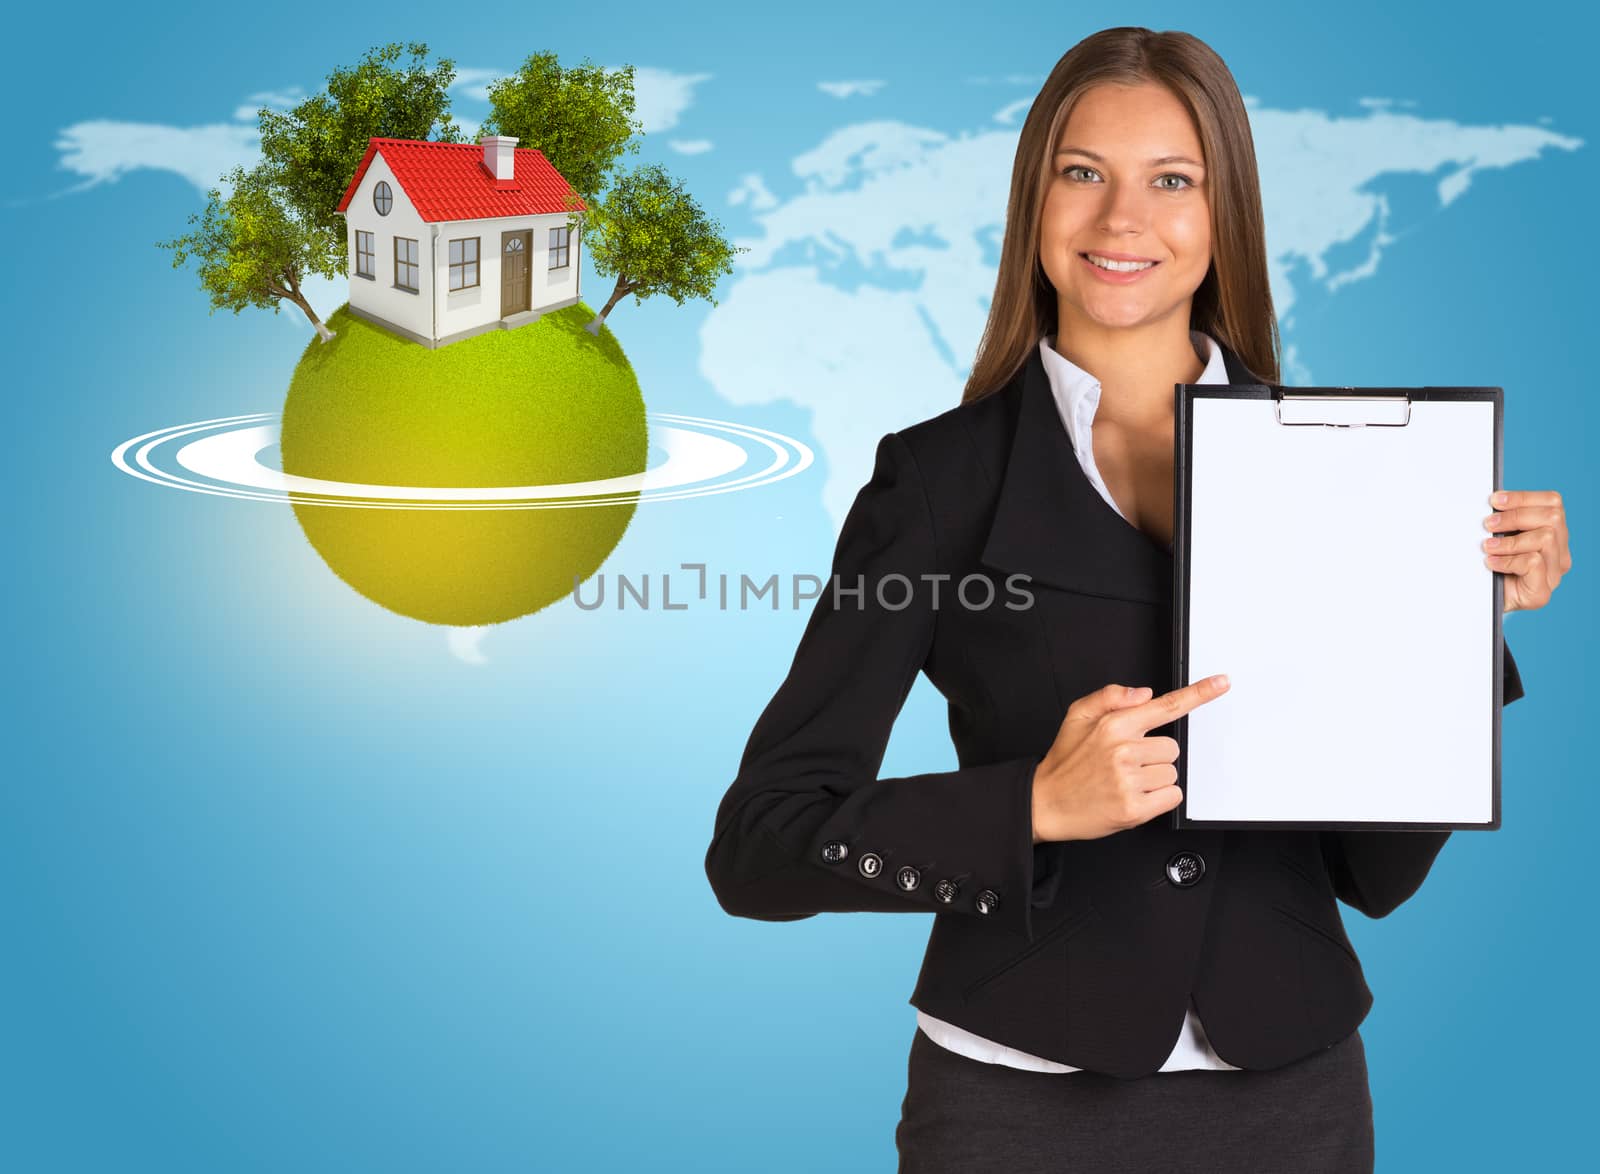 Beautiful businesswoman in suit holding paper holder. Earth with house and trees in background